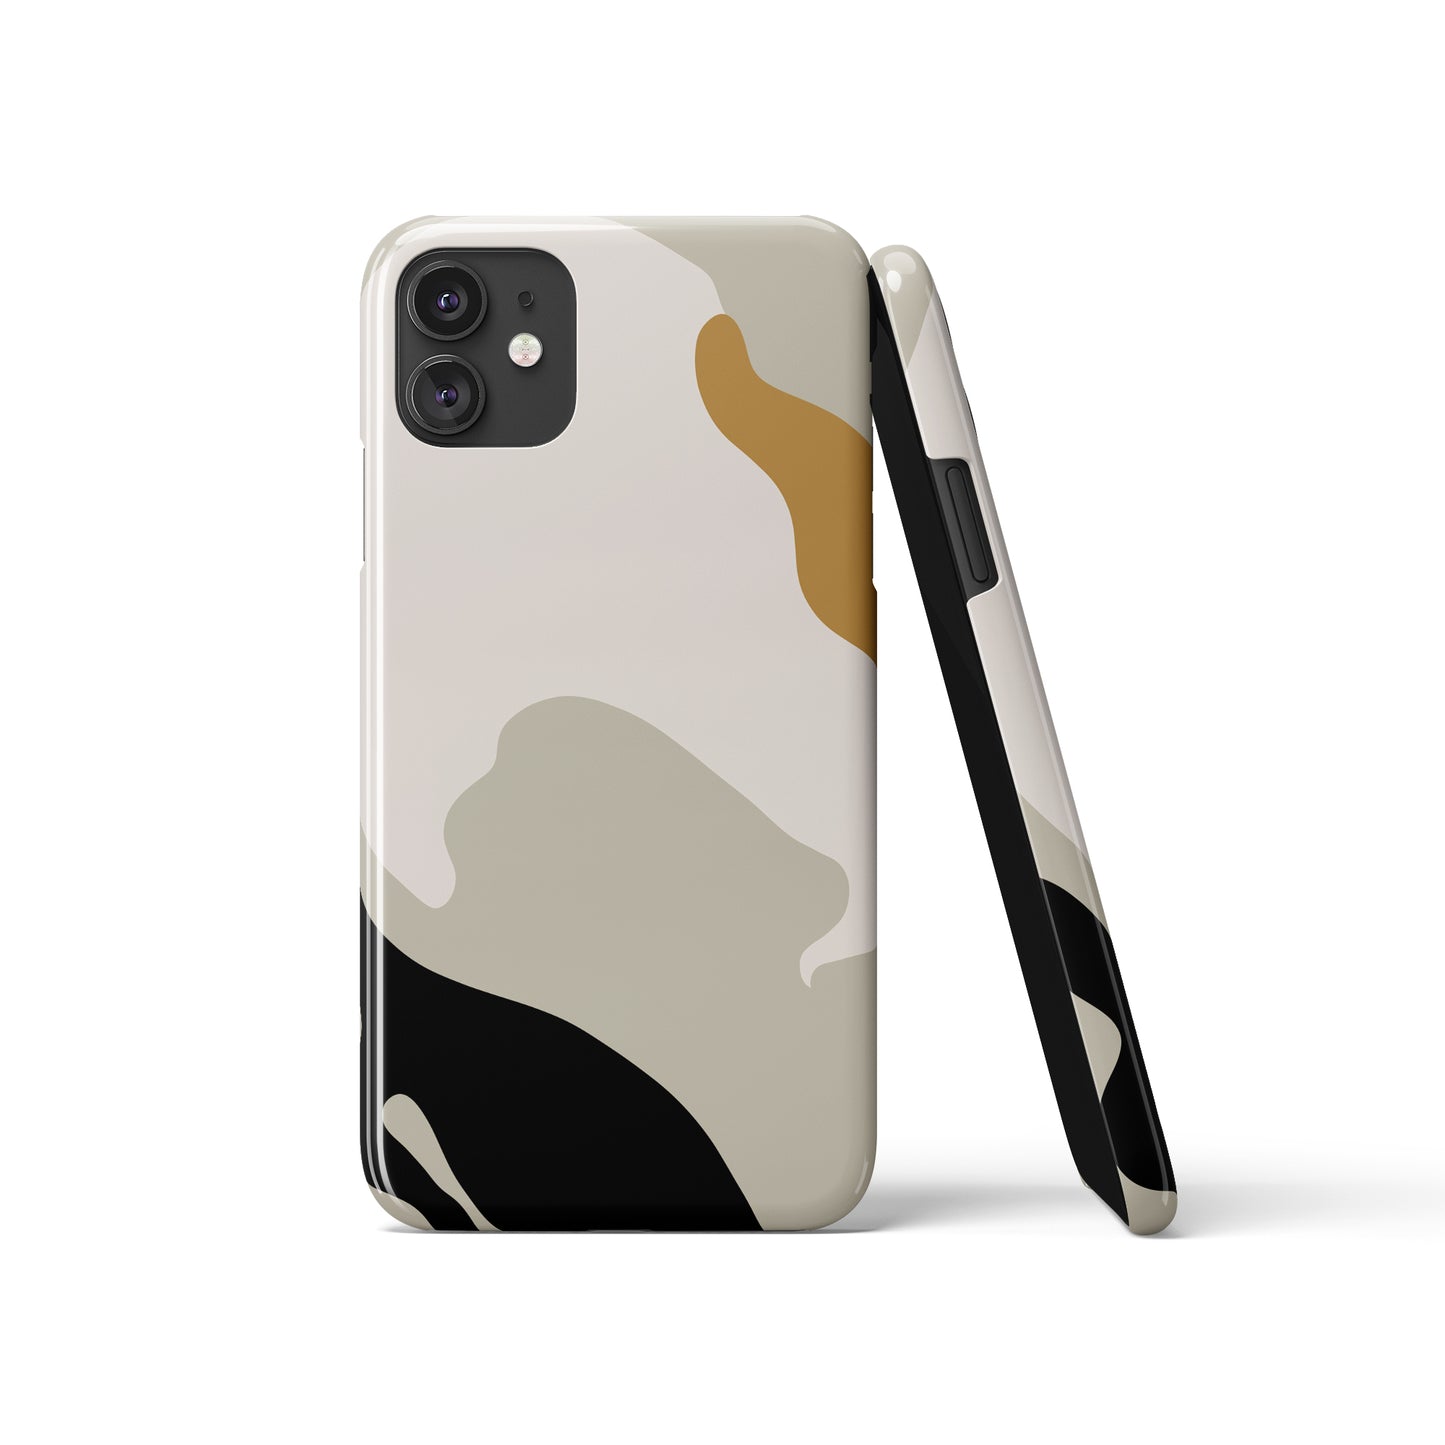 Earth Colors iPhone Case 5